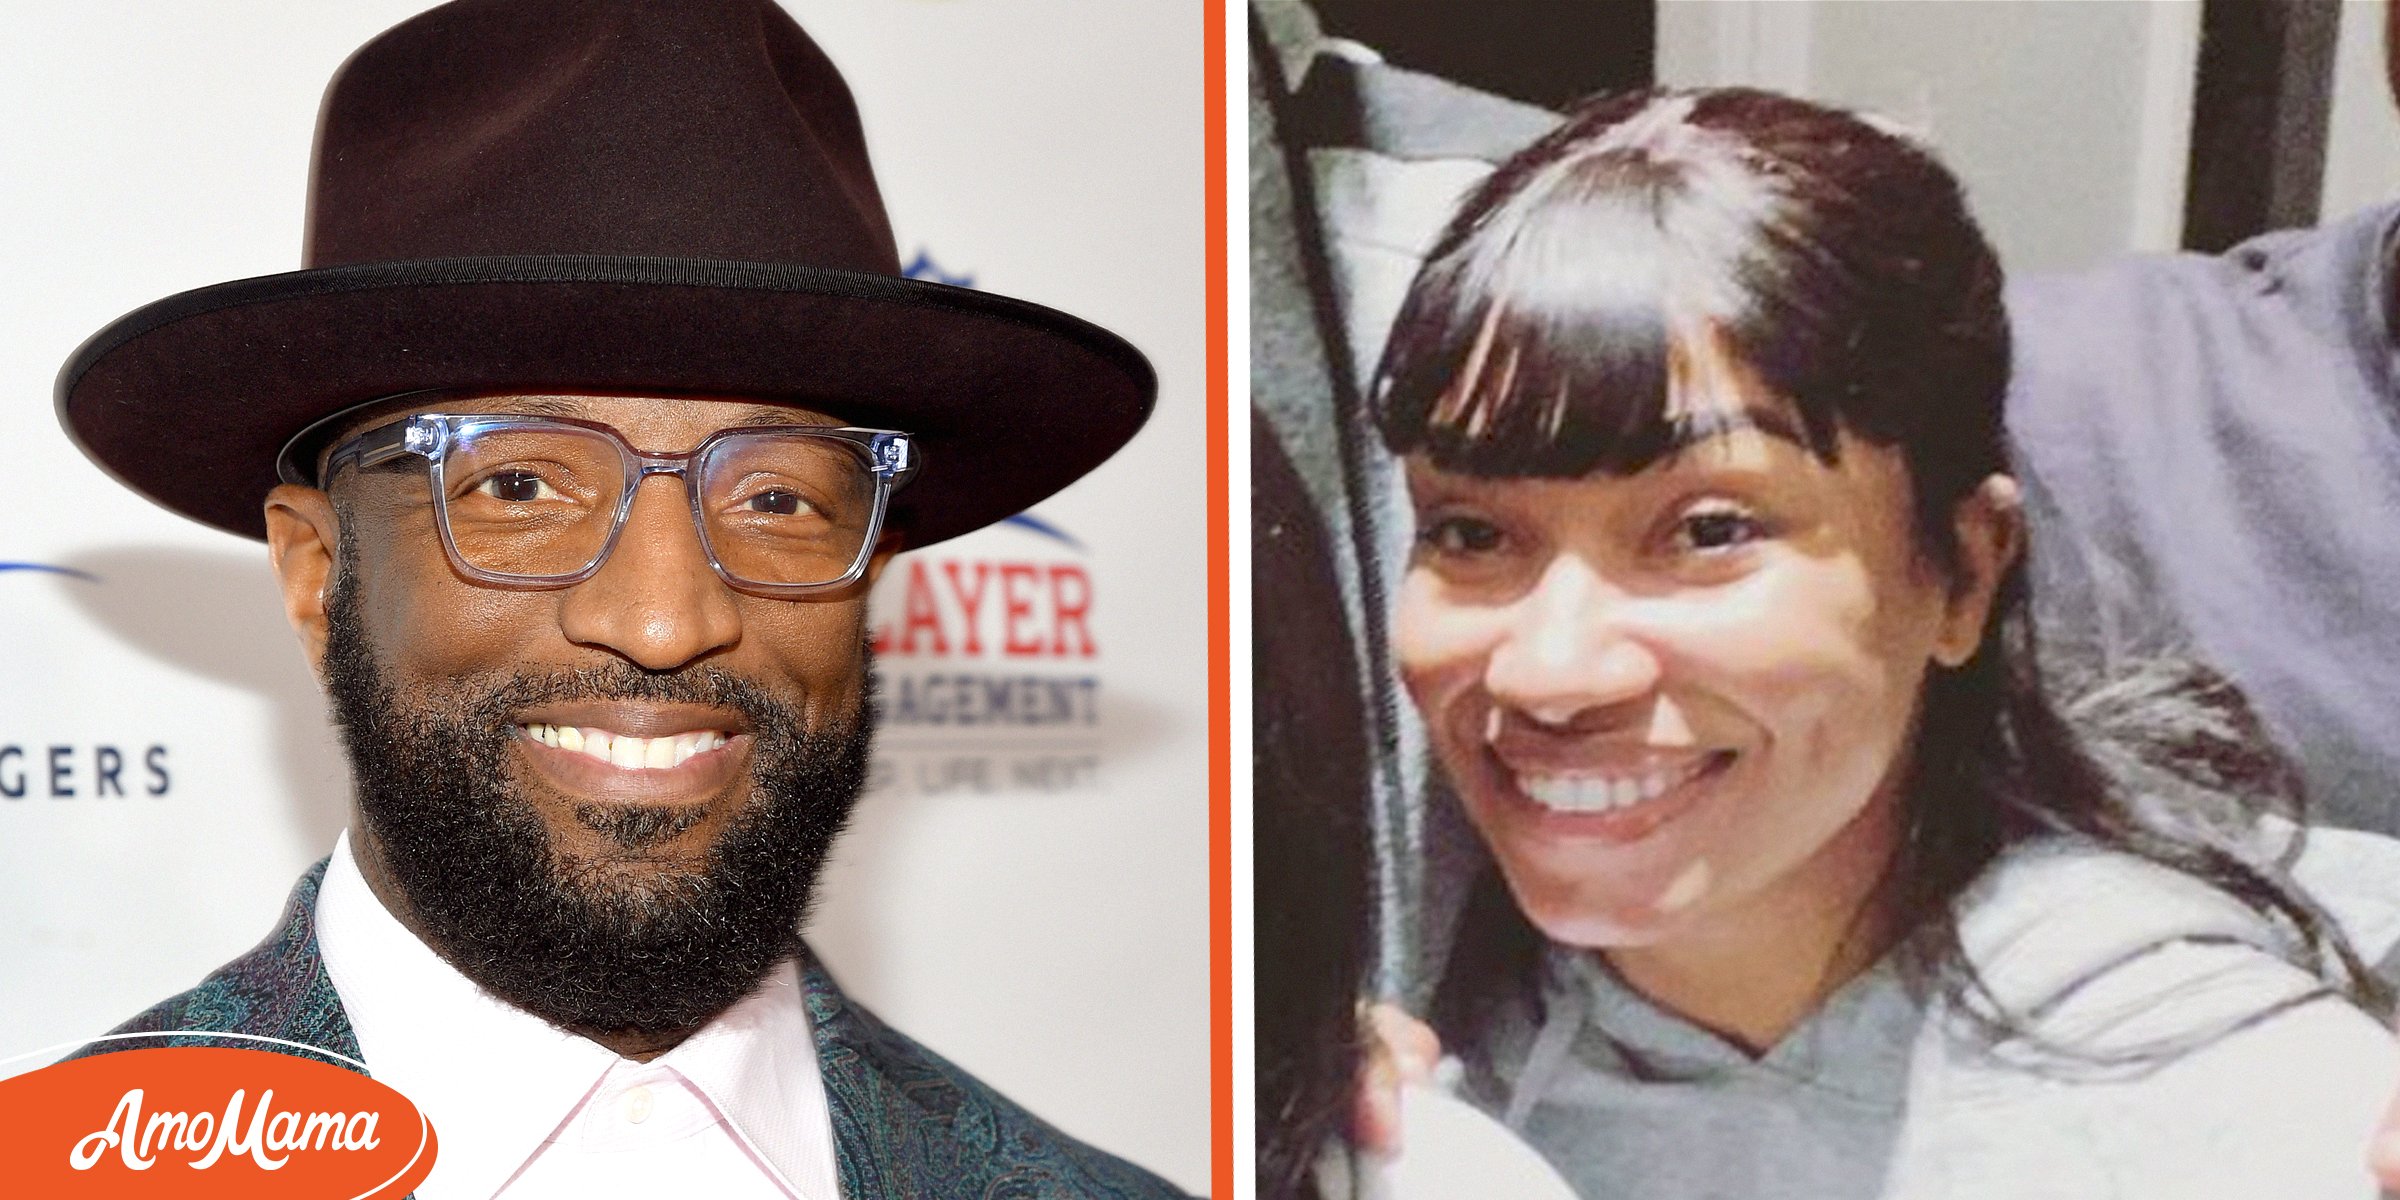 Rickey Smiley Had a Wife Who Remained ‘Family’ despite Their Divorce